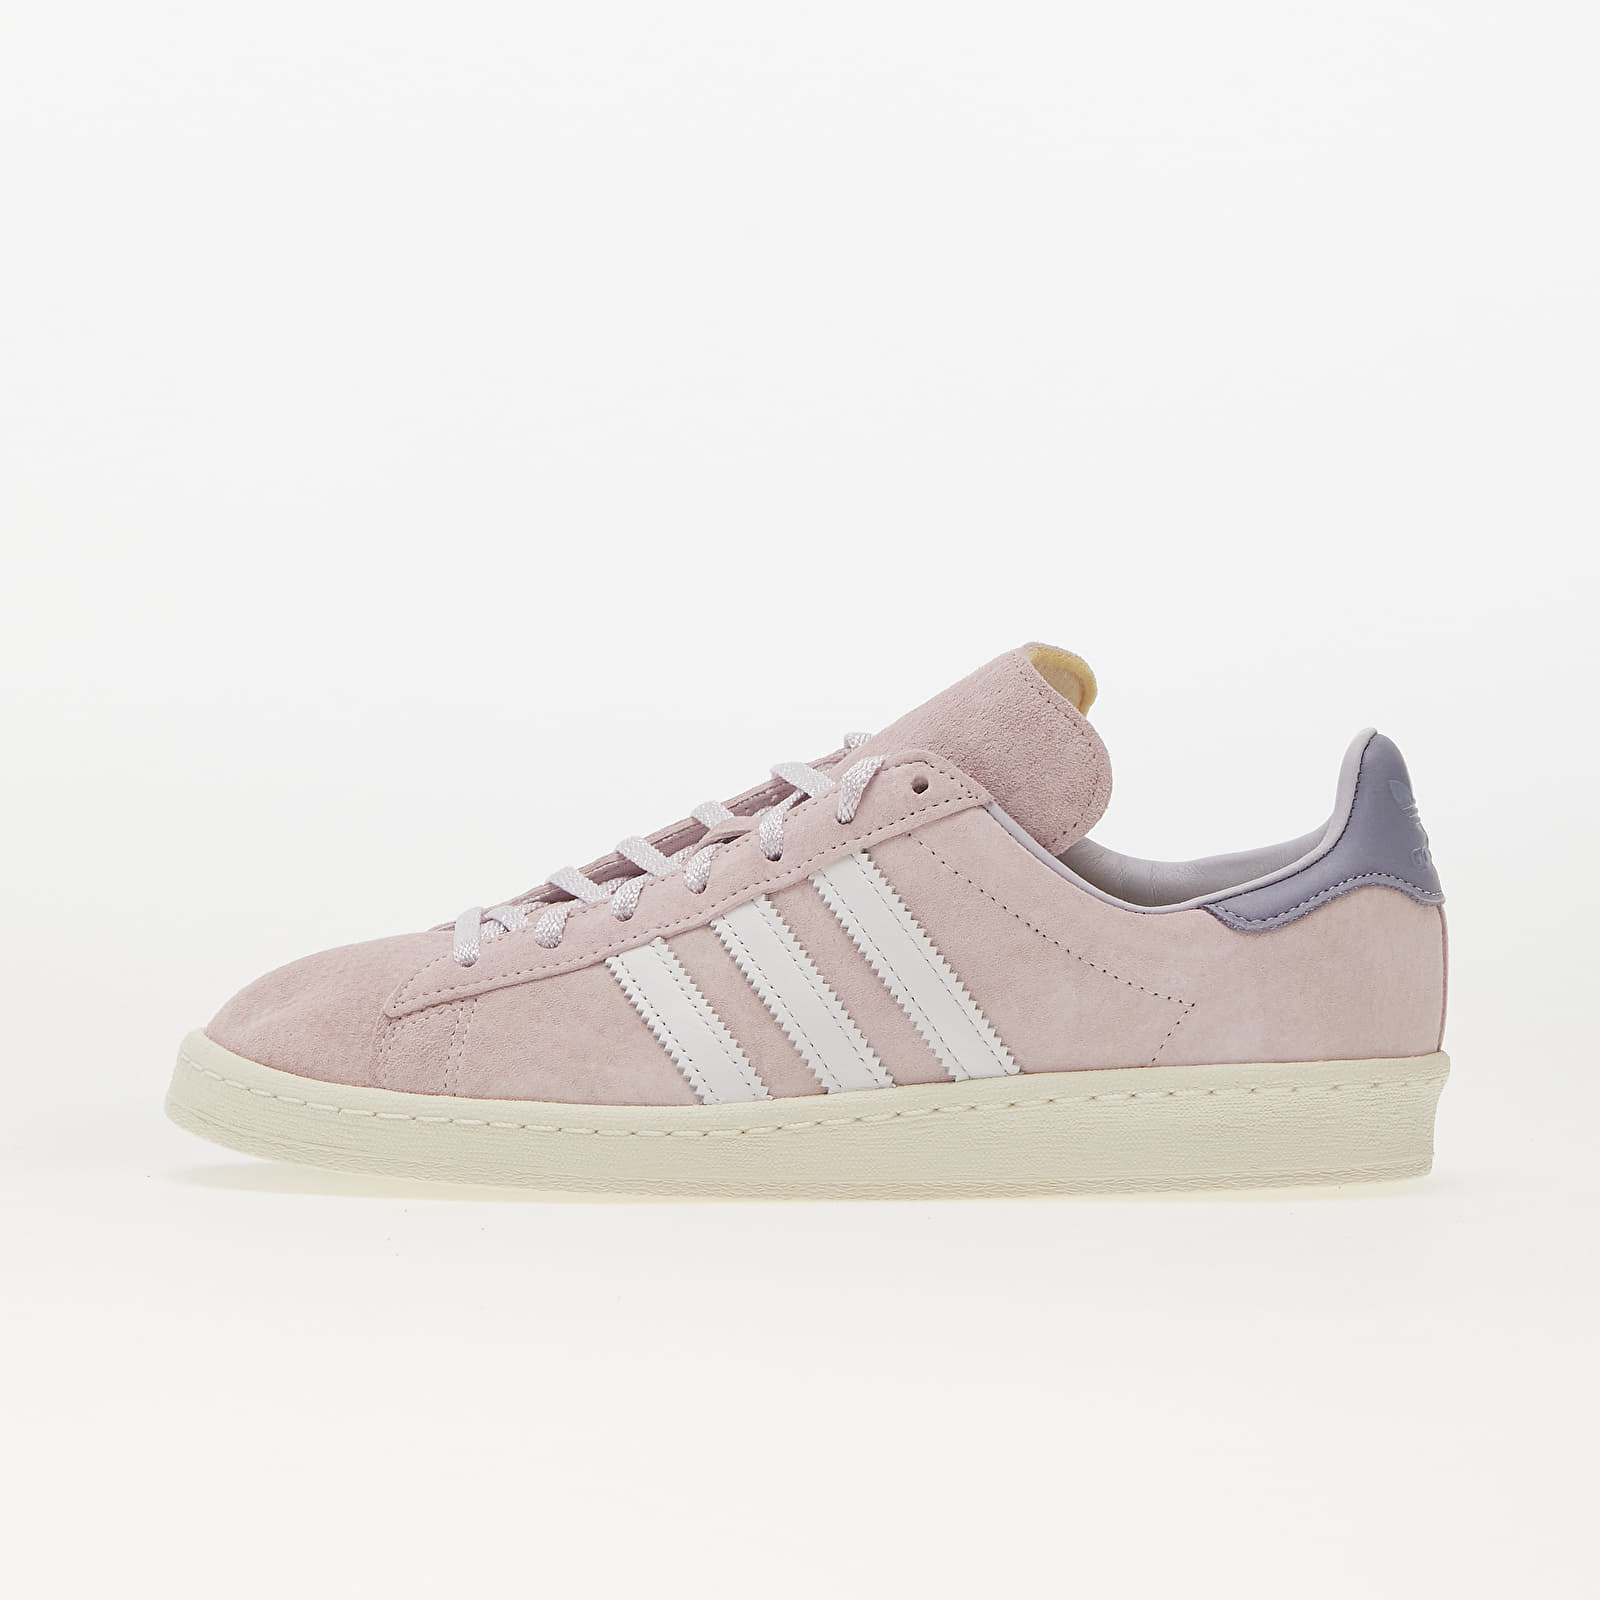 Men's shoes adidas Campus 80s Almost Pink/ Ftw White/ Off White